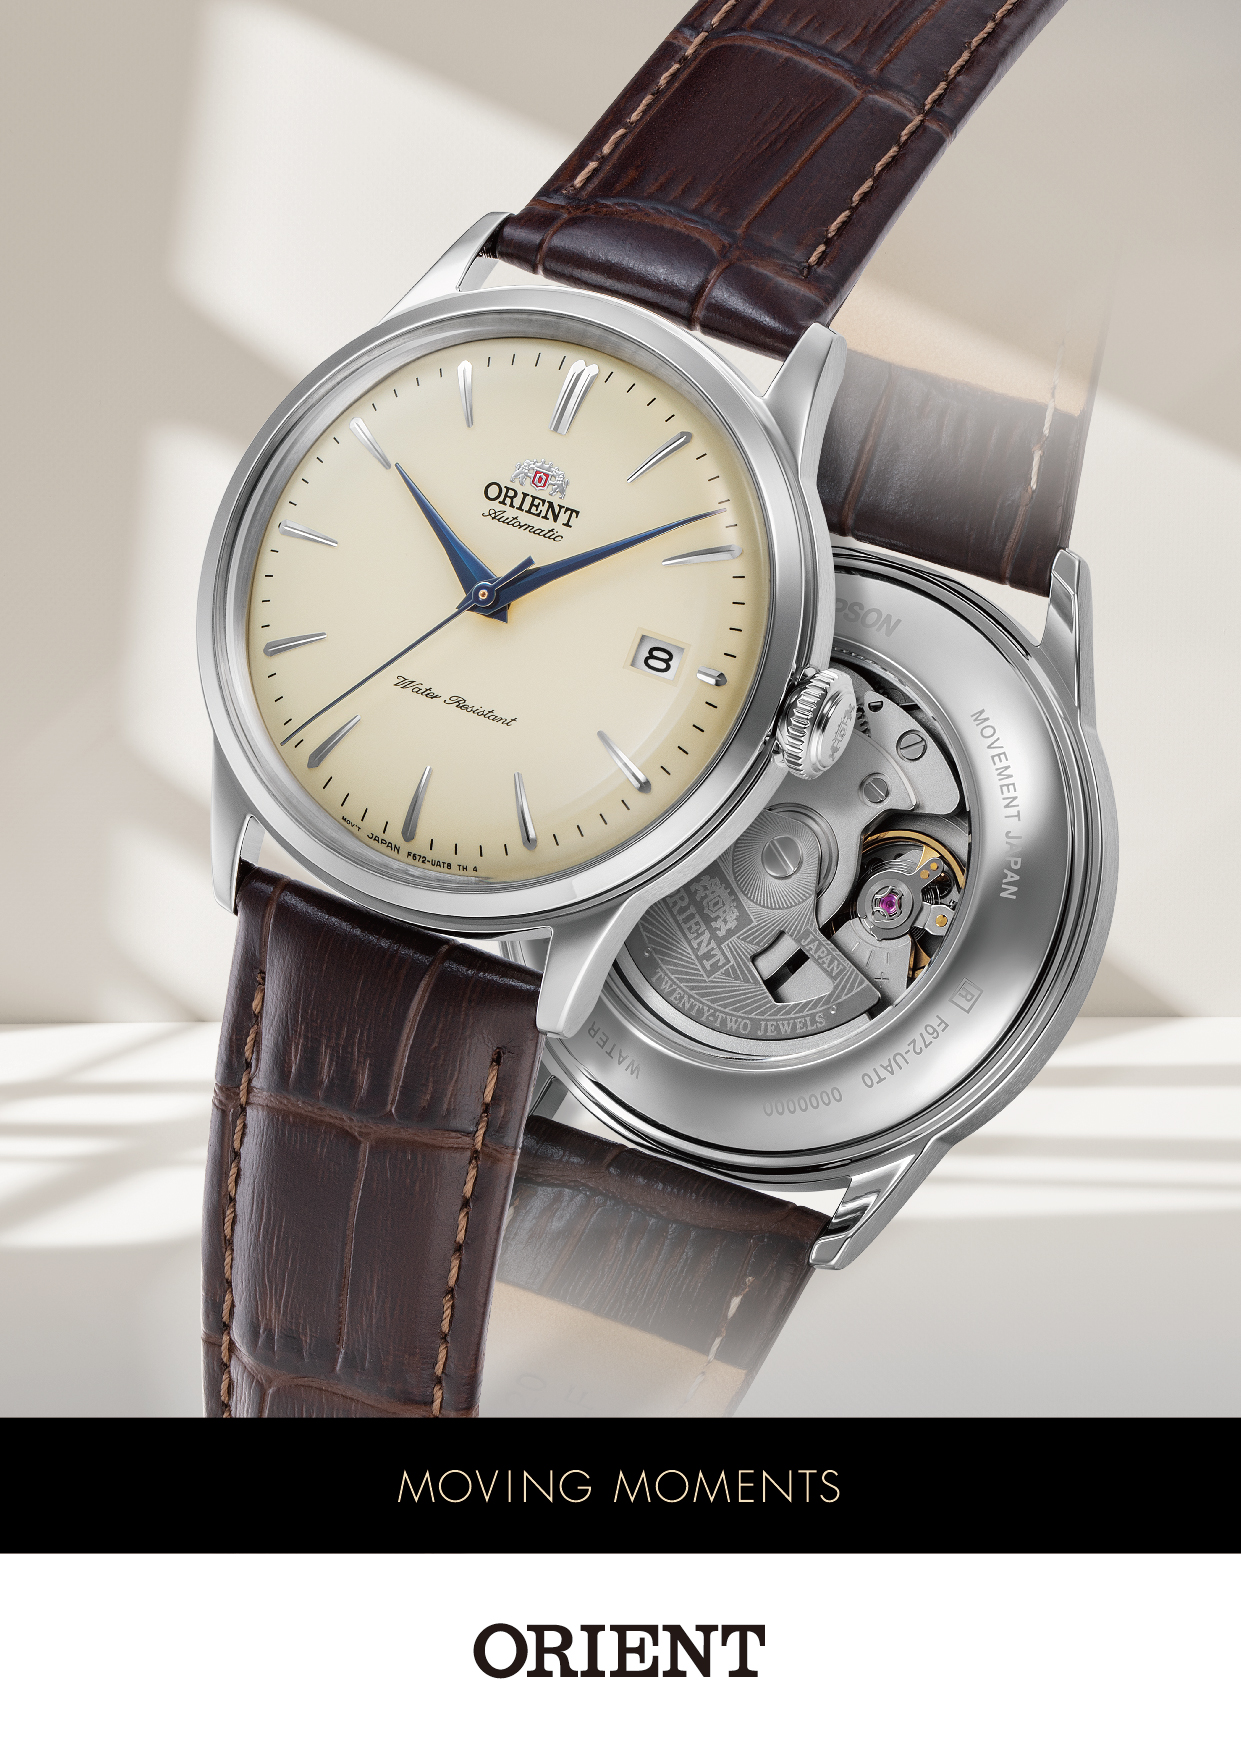 New Orient Classic and Simple Style 38 Models with a 38-mm Case